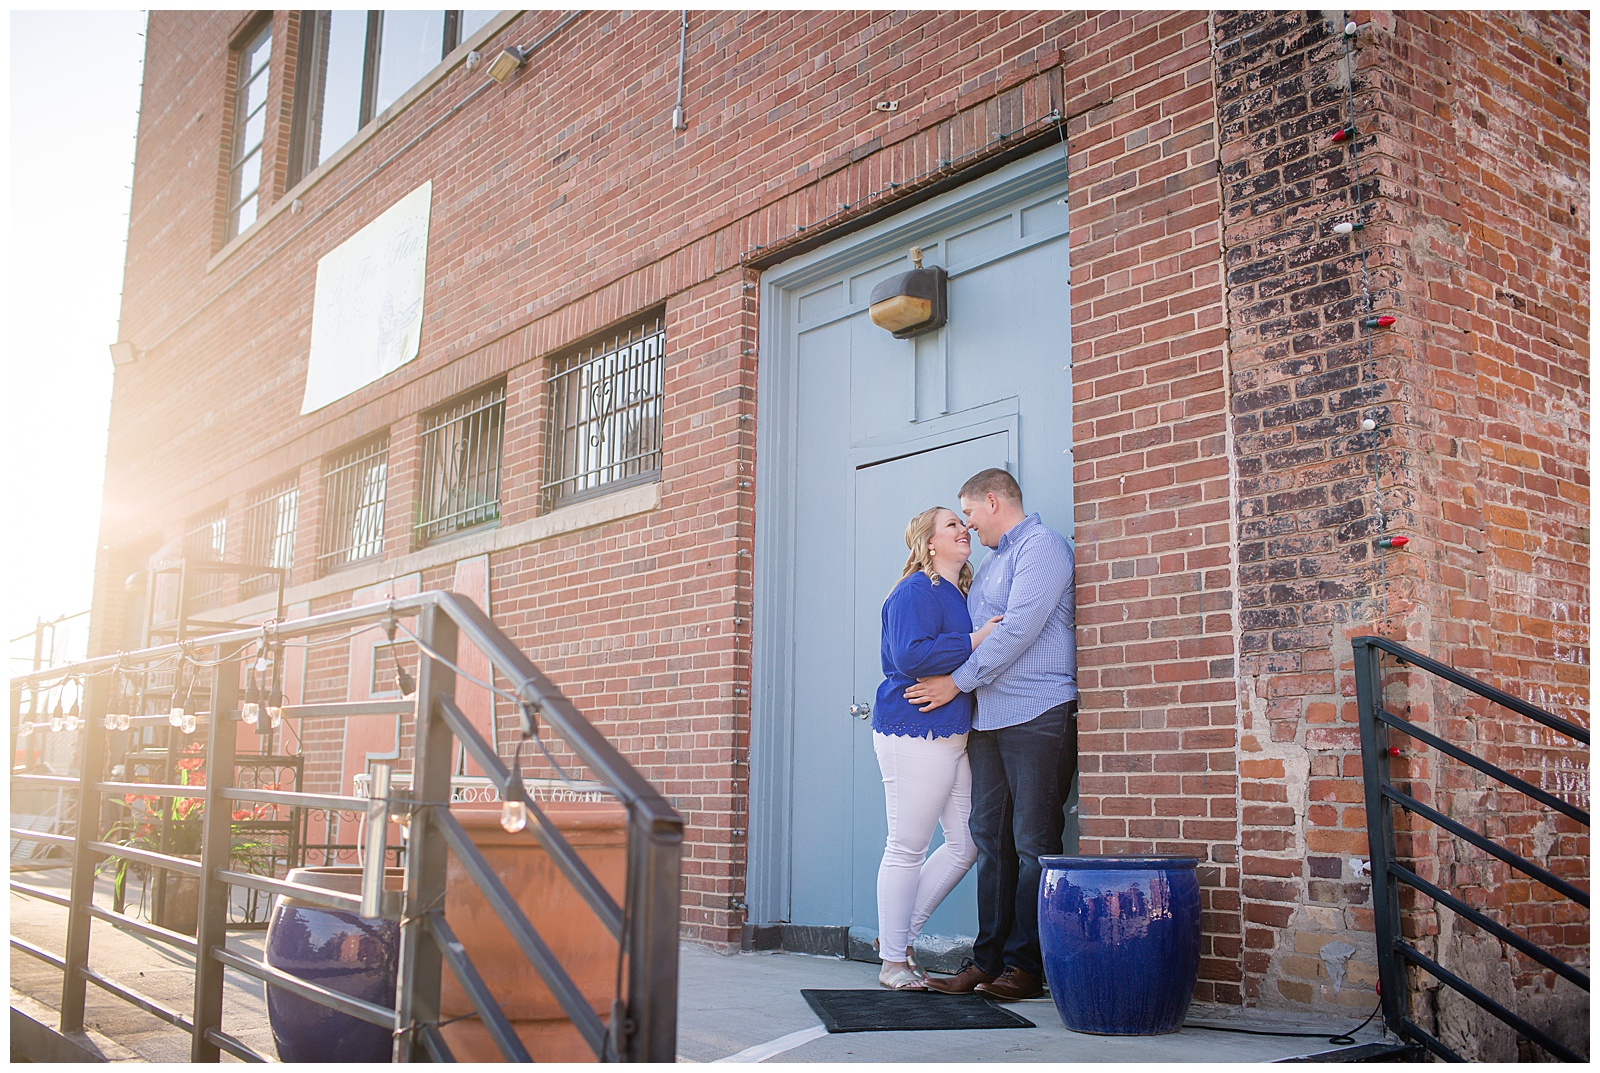 Engagement photography in the West Bottoms and Penn Valley Park by Kansas City wedding photographers Wisdom-Watson Weddings.